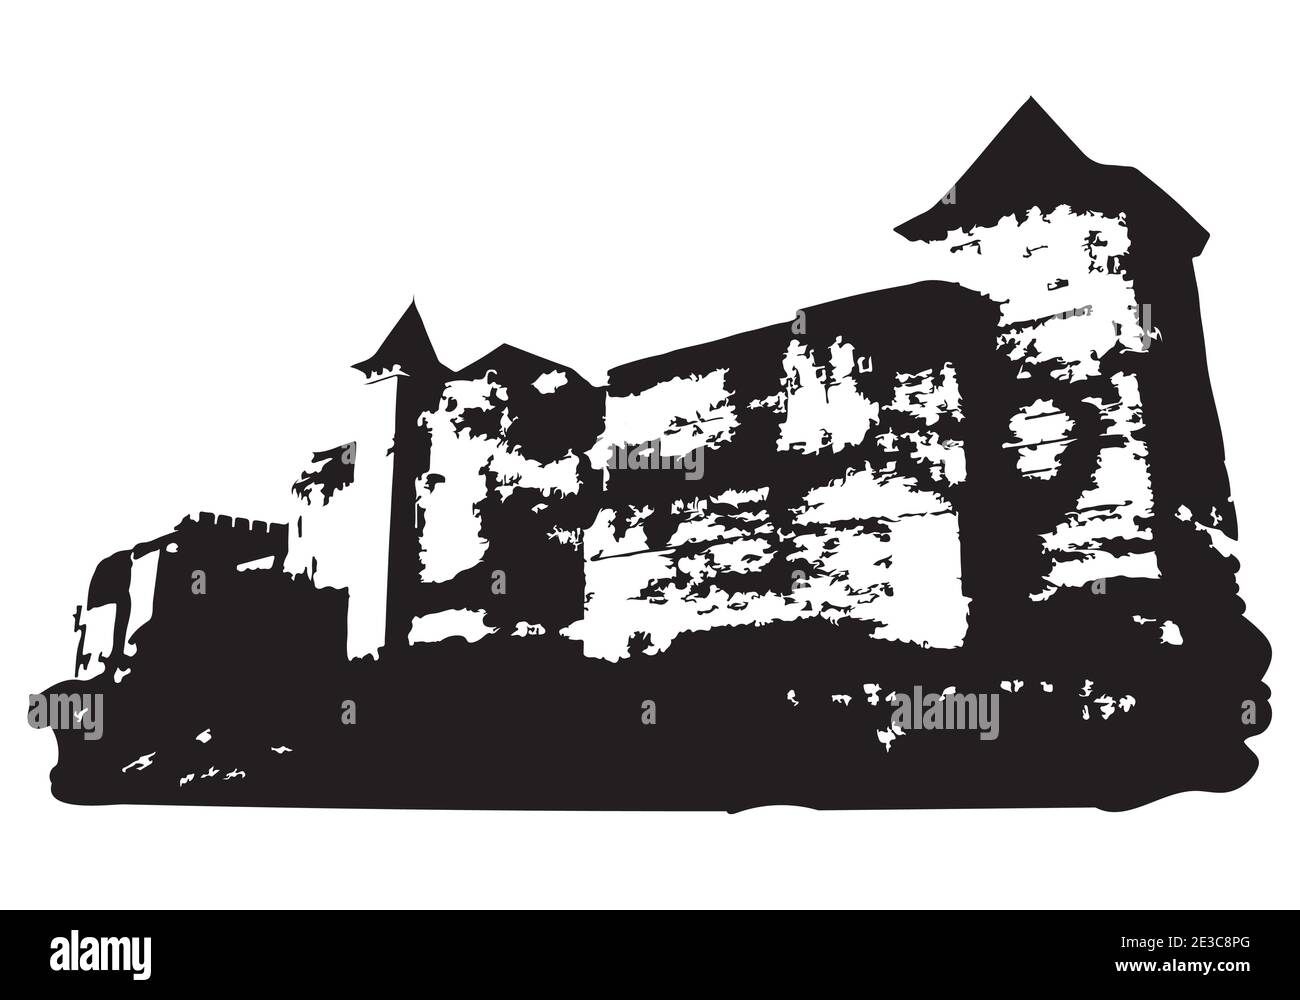 Silhouette of an ancient citadel with stone walls Vector illustration for design Stock Vector